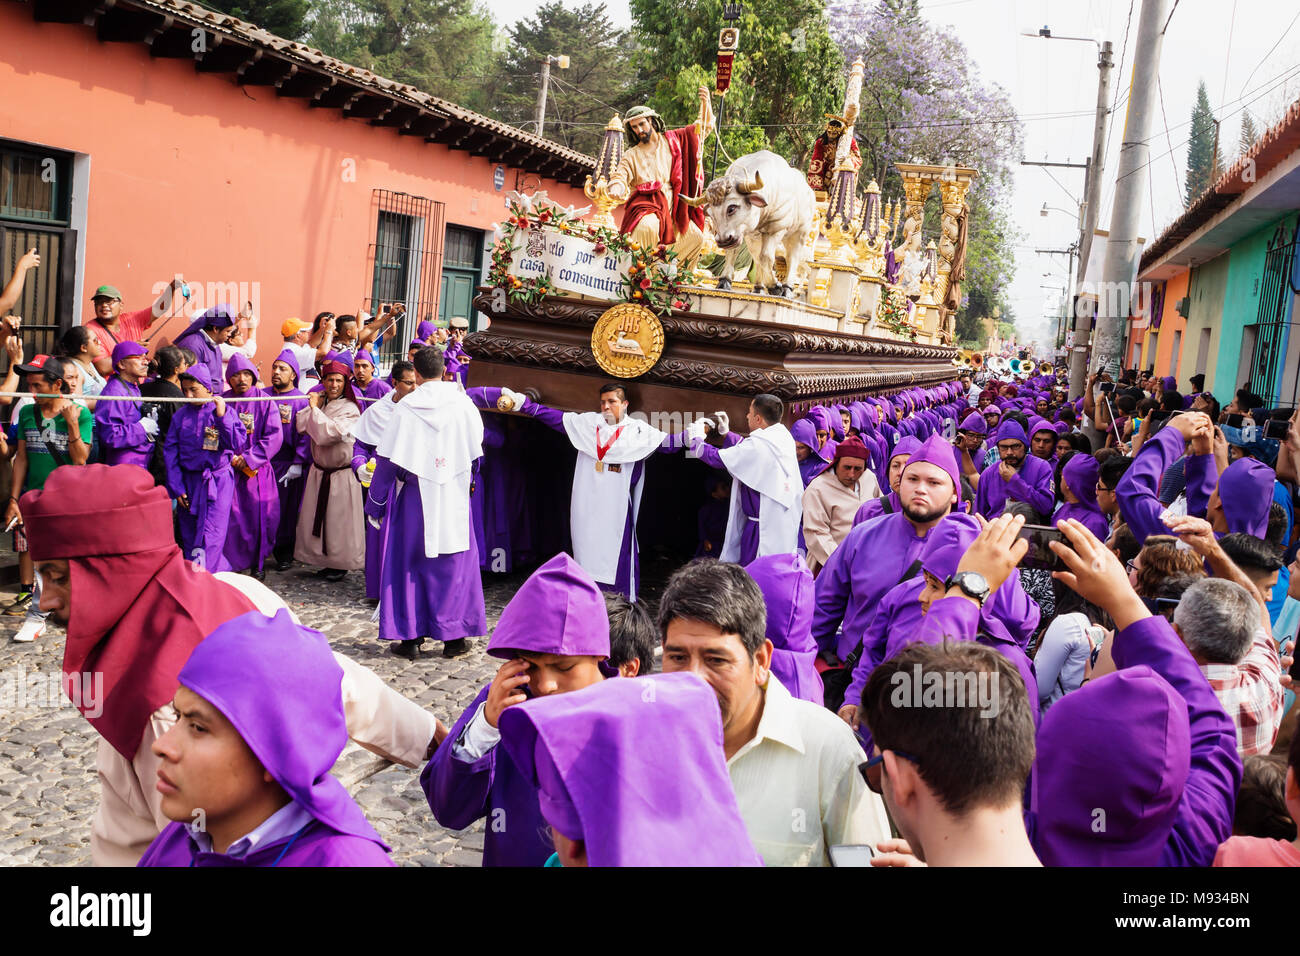 Purple robed men carrying a float with Christ and a cross at the procession of San Bartolome de Becerra, Antigua, Guatemala Stock Photo